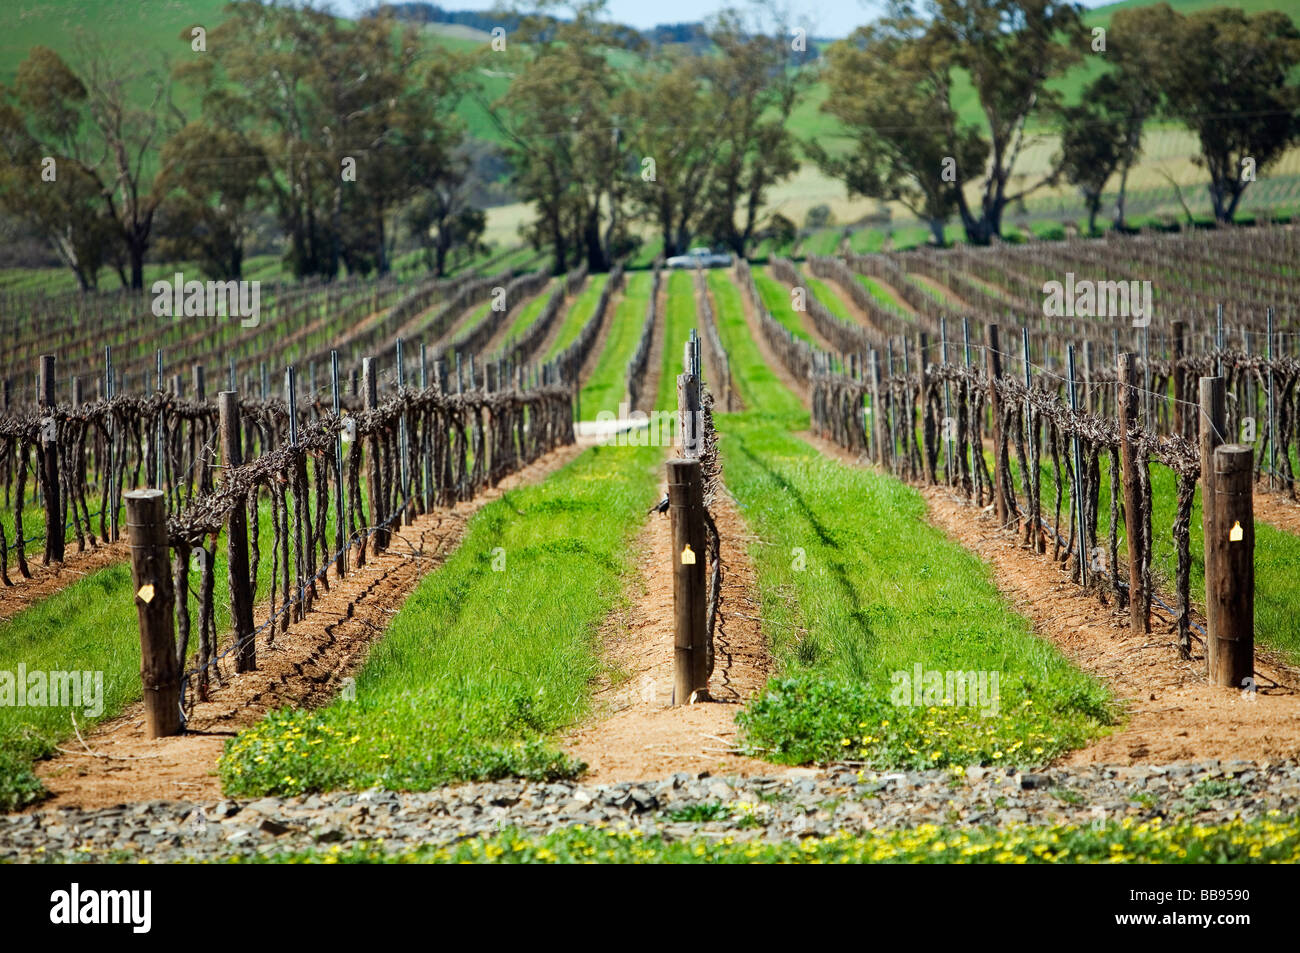 Rows of grapevines at the Jacobs Creek winery.  Barossa Valley South Australia AUSTRALIA Stock Photo